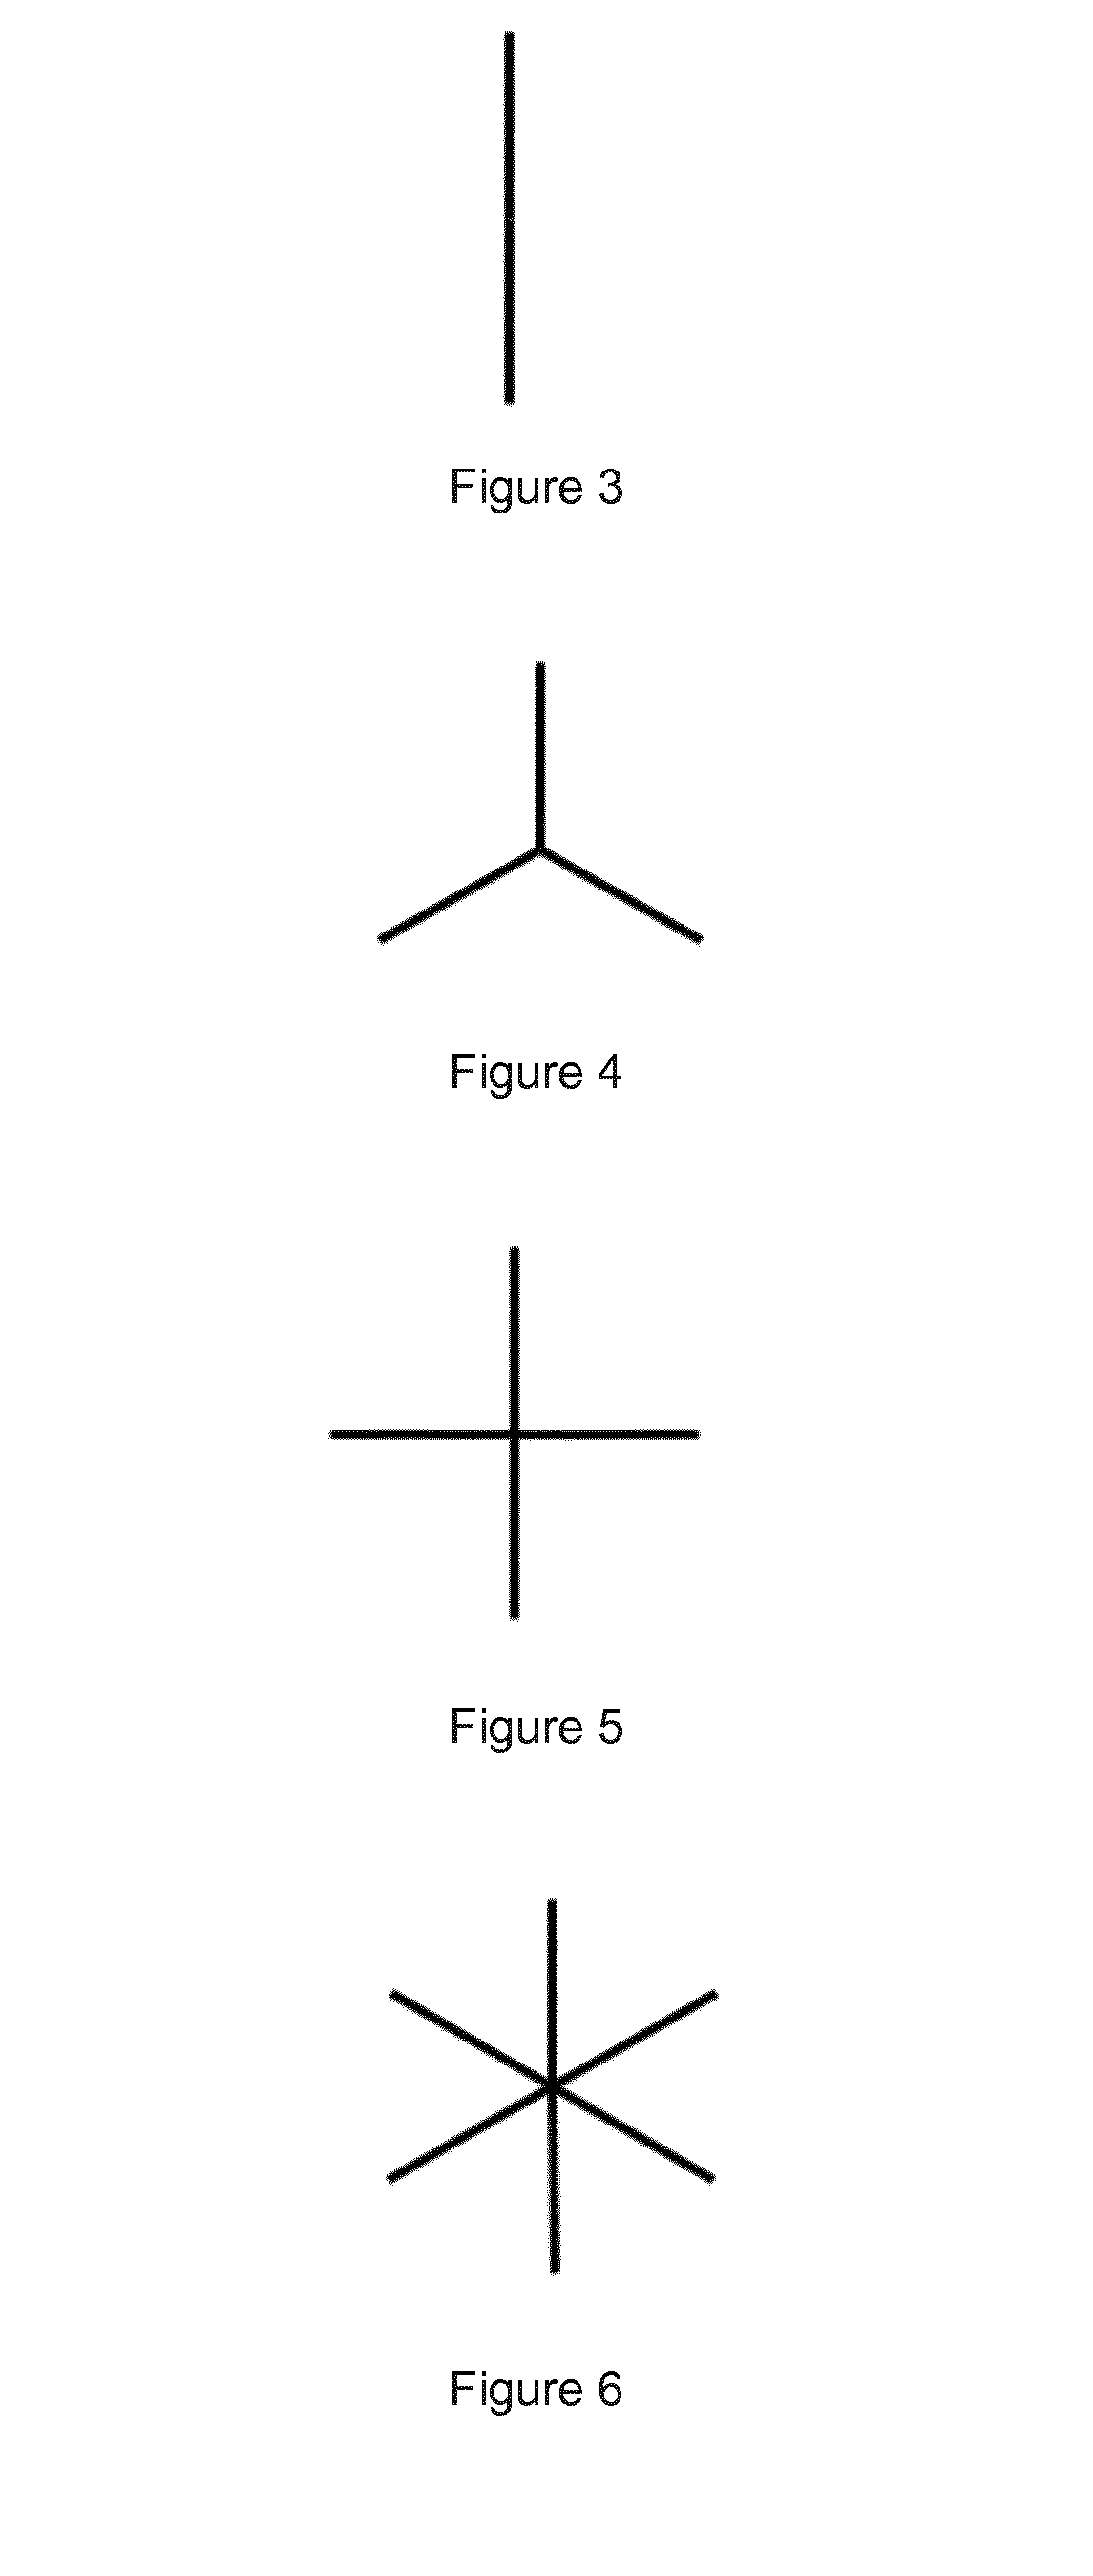 A solar absorber body for a concentrating solar power system and a method for manufacturing a solar absorber body